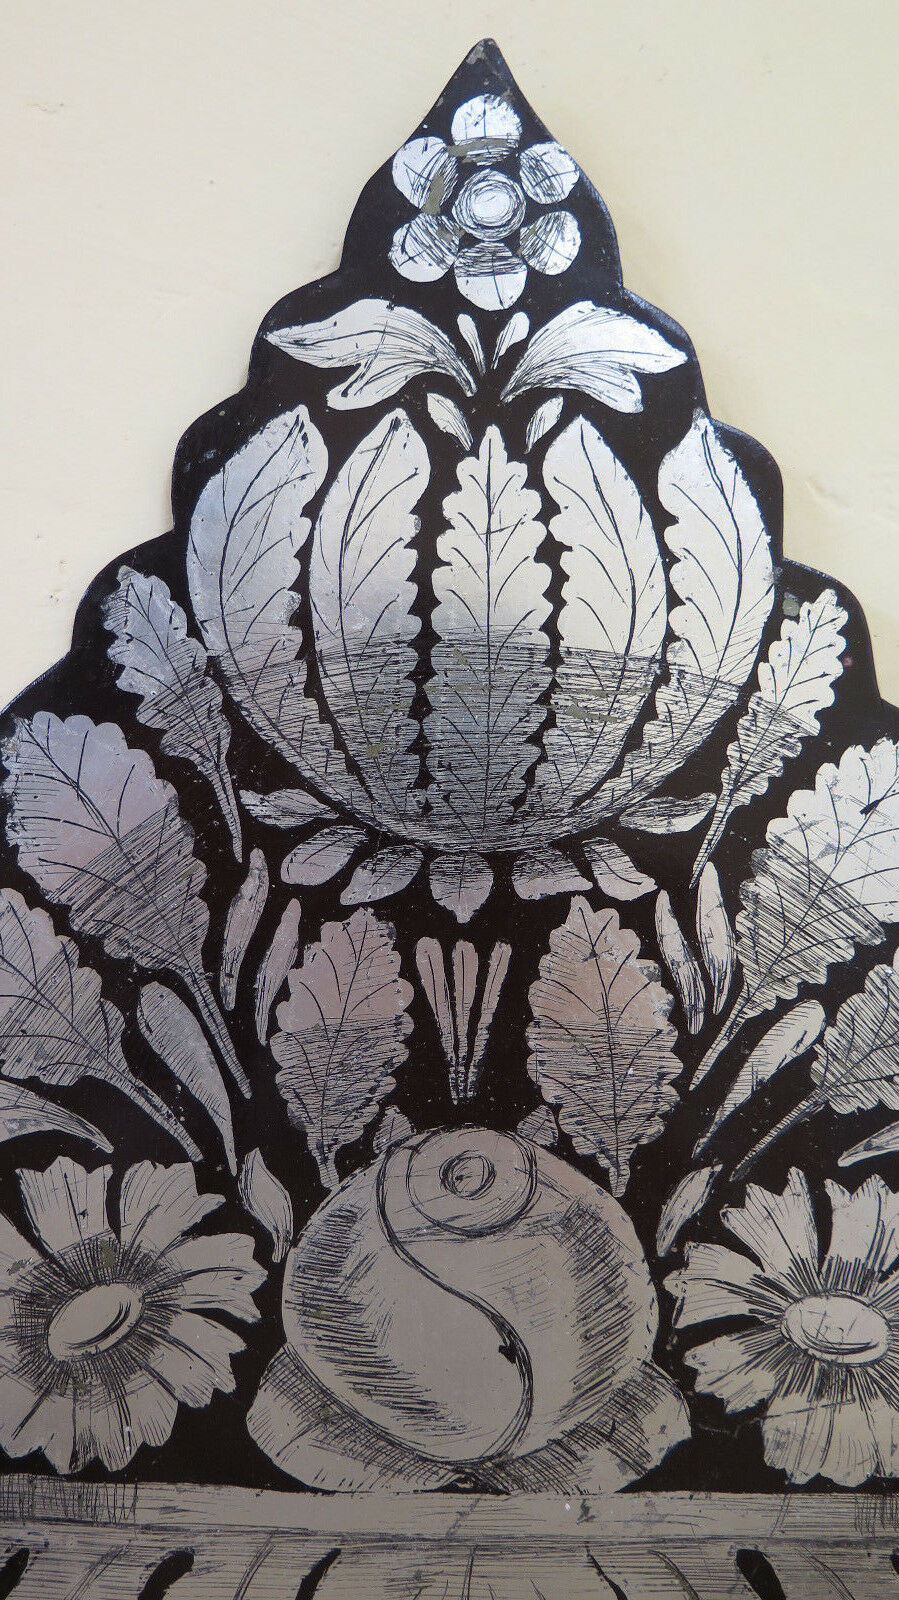 ANTIQUE BULIN ENGRAVING ON IRON DECORATIVE FRIEZE FLORAL PAINTING CH13 19